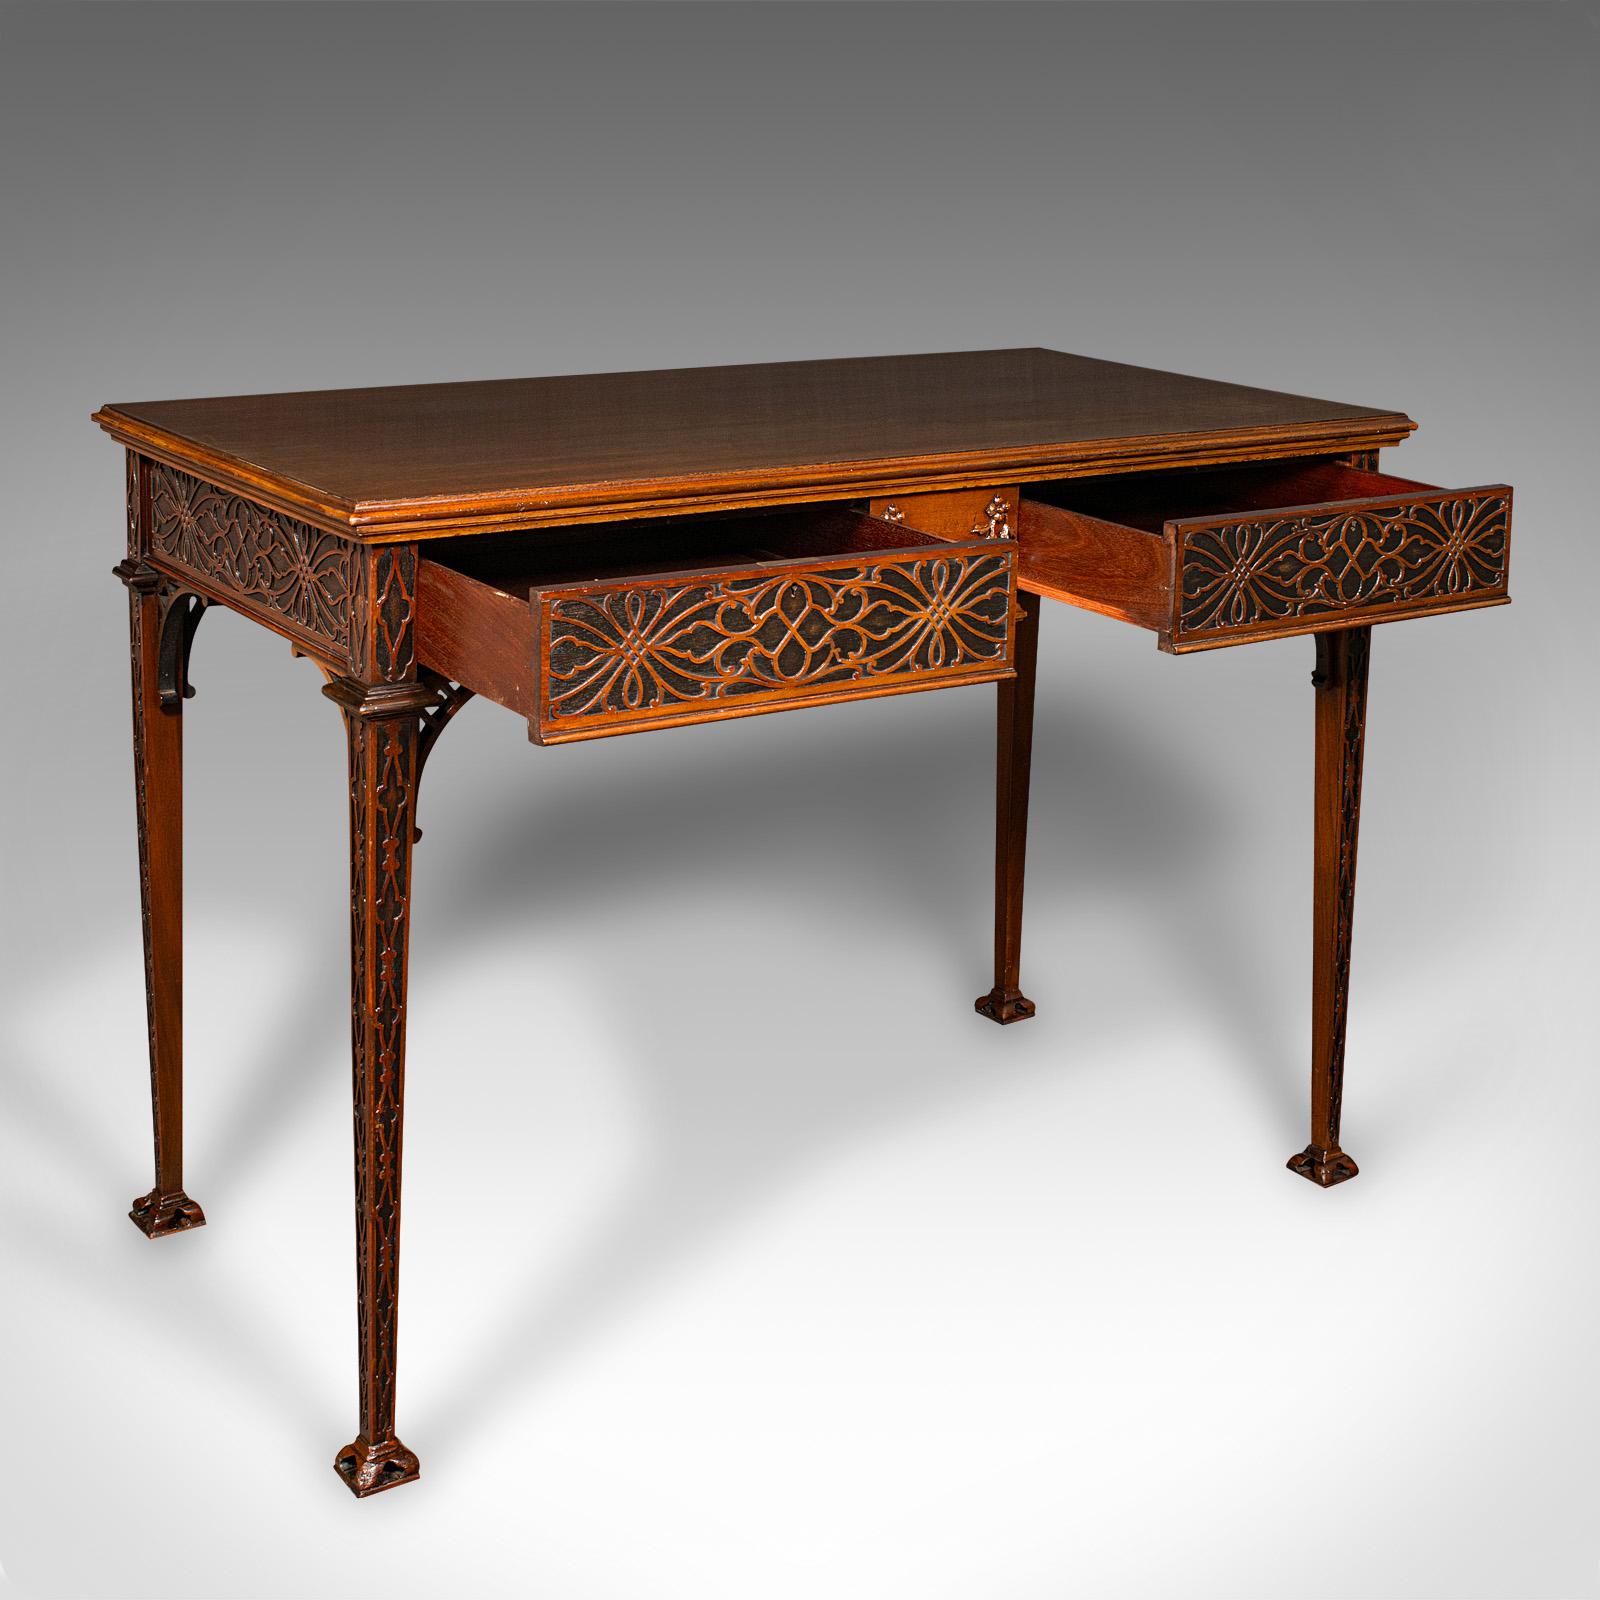 
This is an antique Chippendale revival side table. An English, mahogany console, hall or writing table, dating to the Edwardian period, circa 1910.

A treat of fretwork decoration and of a generous size for use throughout the home
Displays a